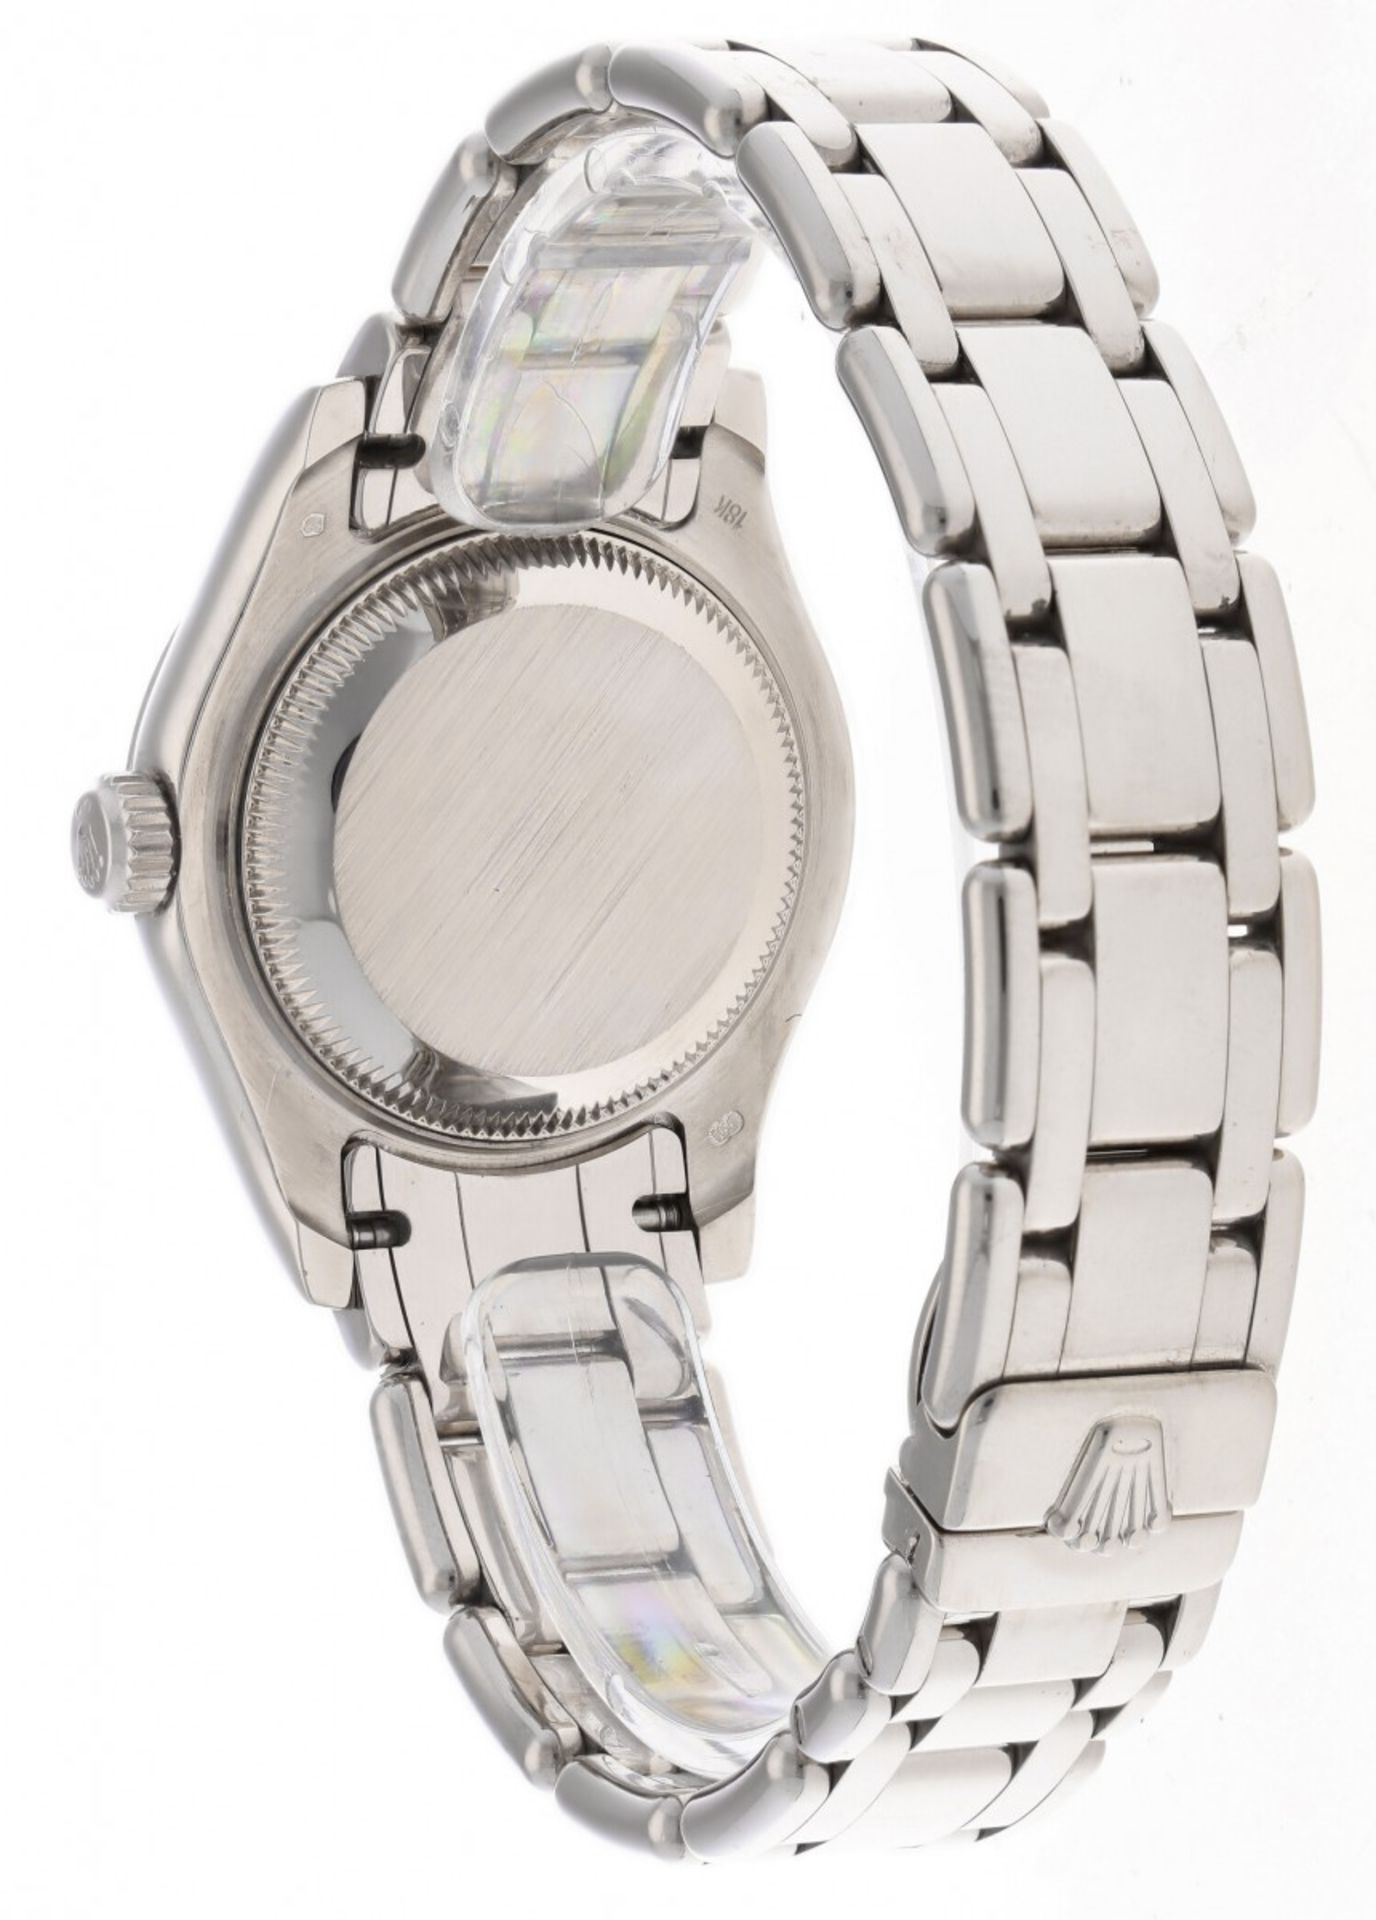 Rolex Pearlmaster 80319 - Ladies watch - ca. 2000 - Image 3 of 6